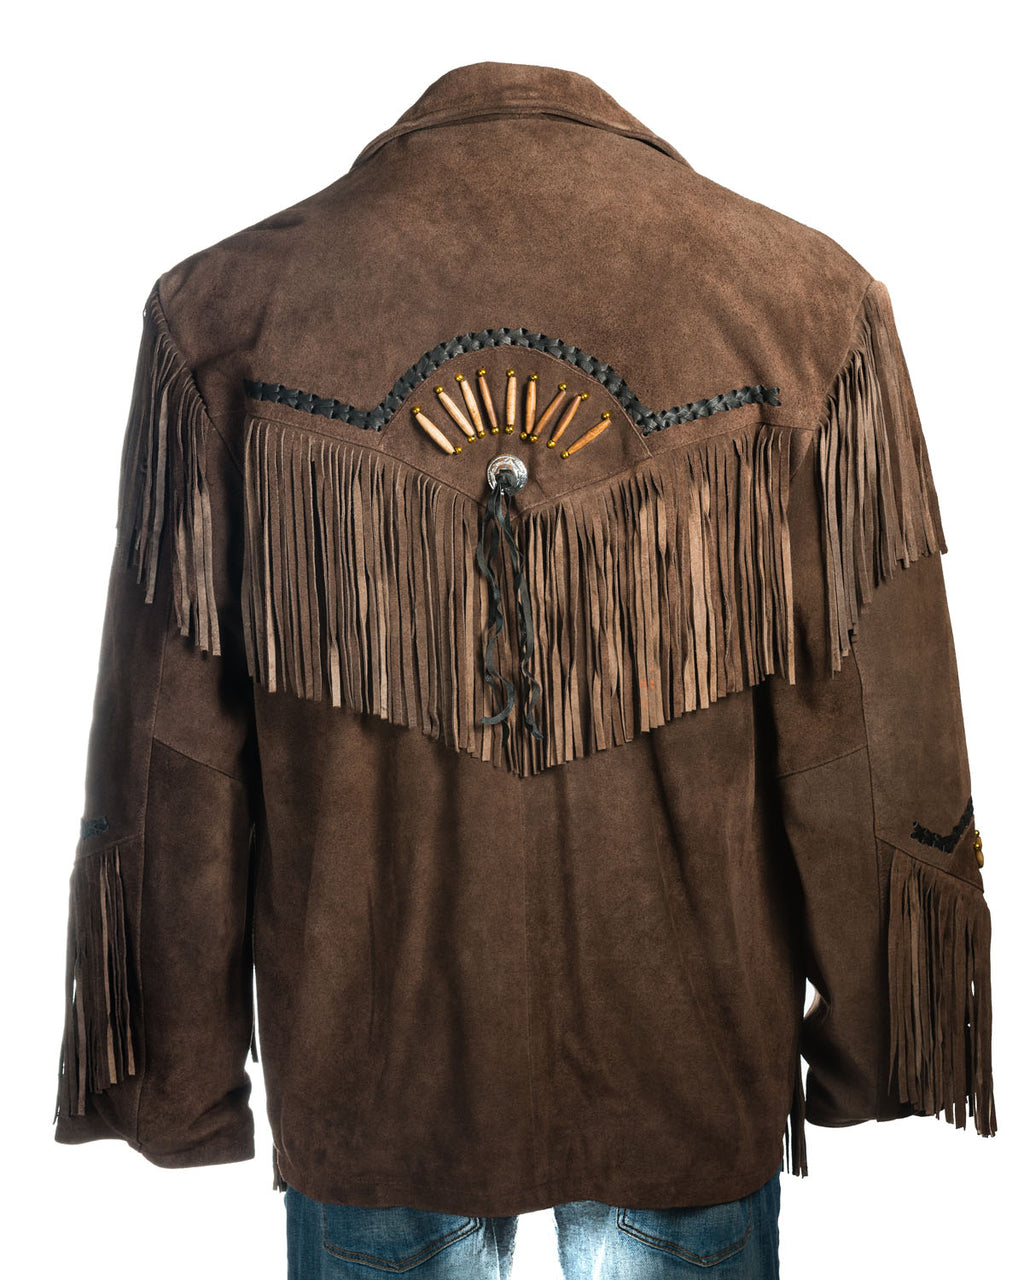 Men's Black Suede Native American Western Style Jacket with Fringe and Beads - Navajo Men's